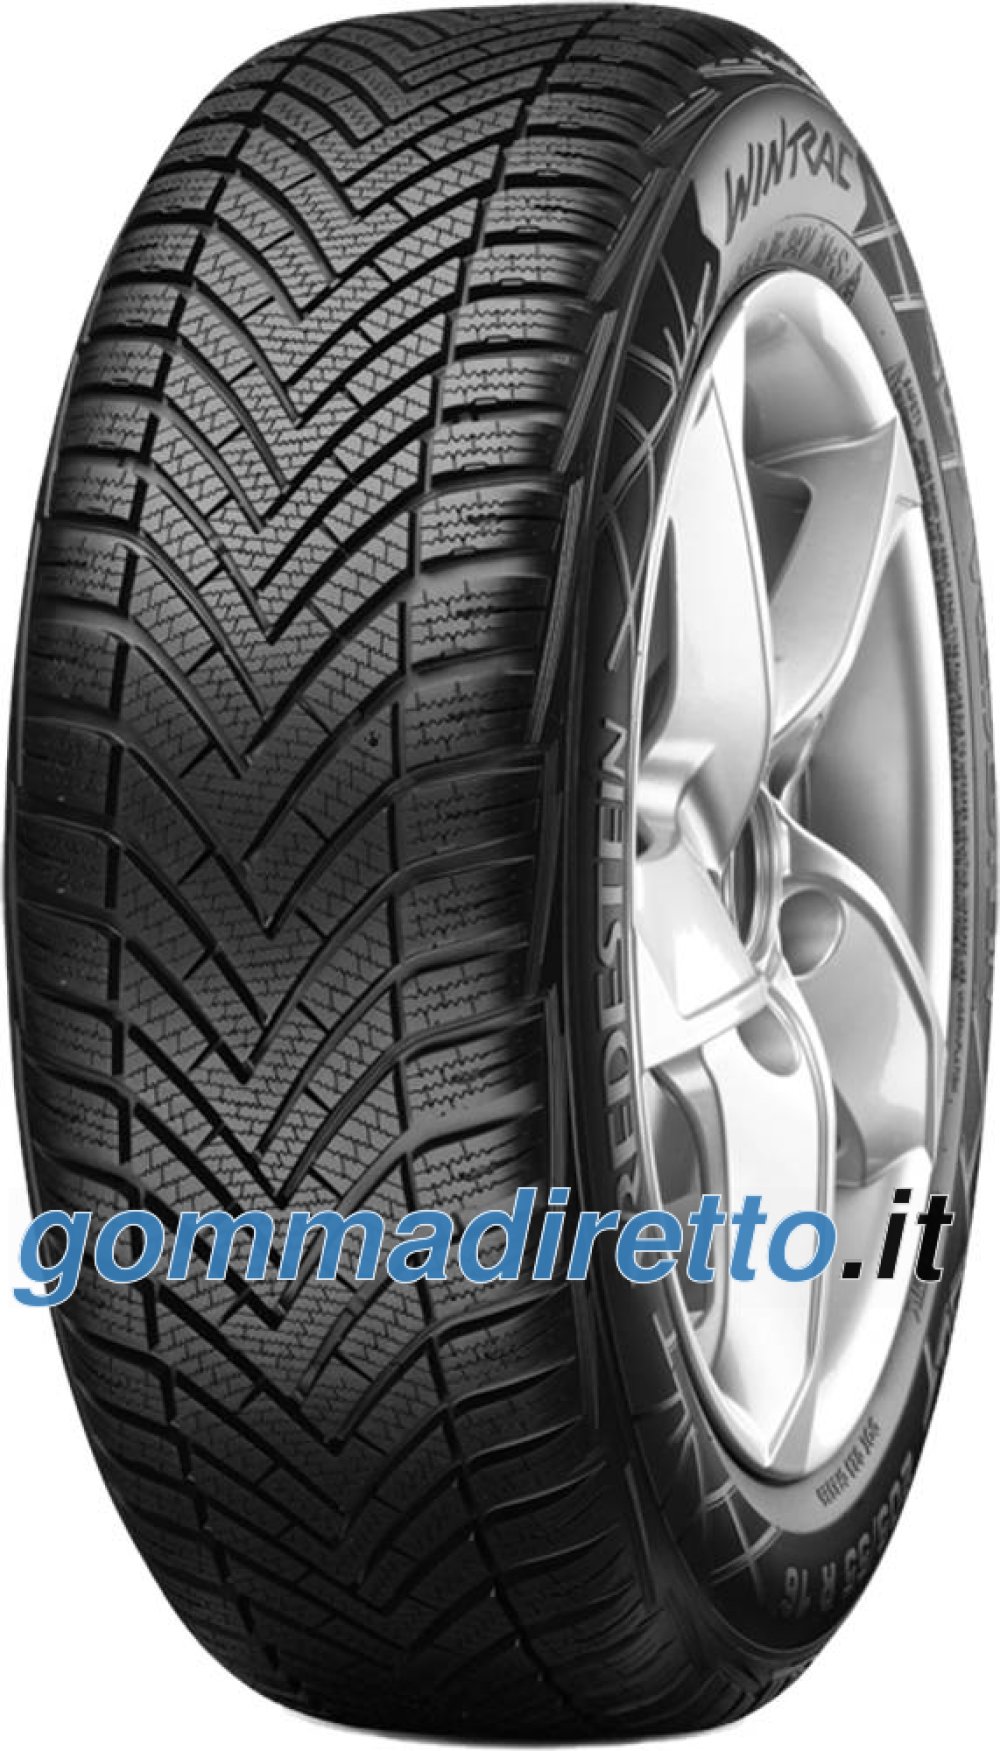 Image of        Vredestein Wintrac ( 195/60 R15 88H )